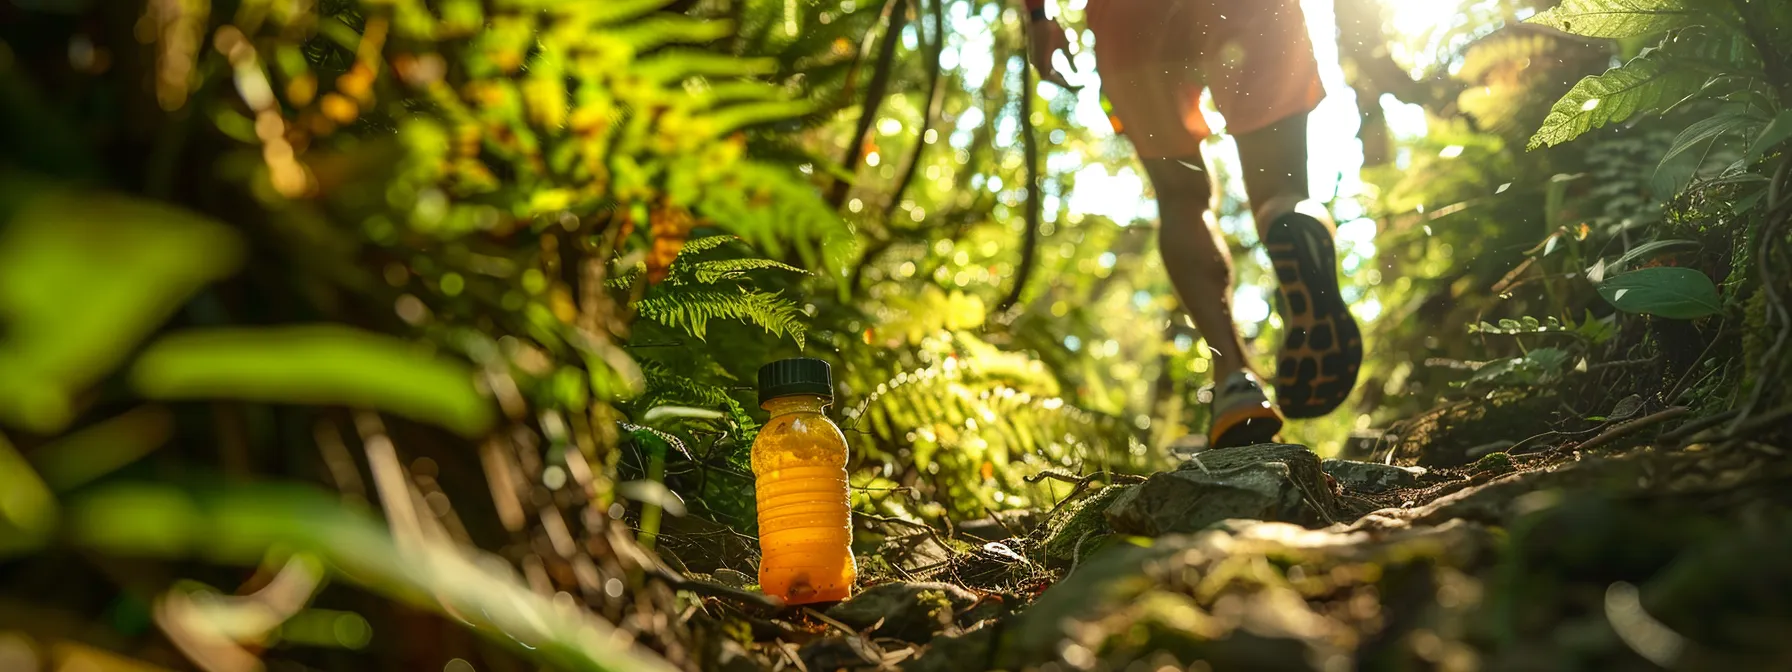 a person energetically running up a mountain trail with a bottle of tangy tangerine in hand, surrounded by lush green foliage.